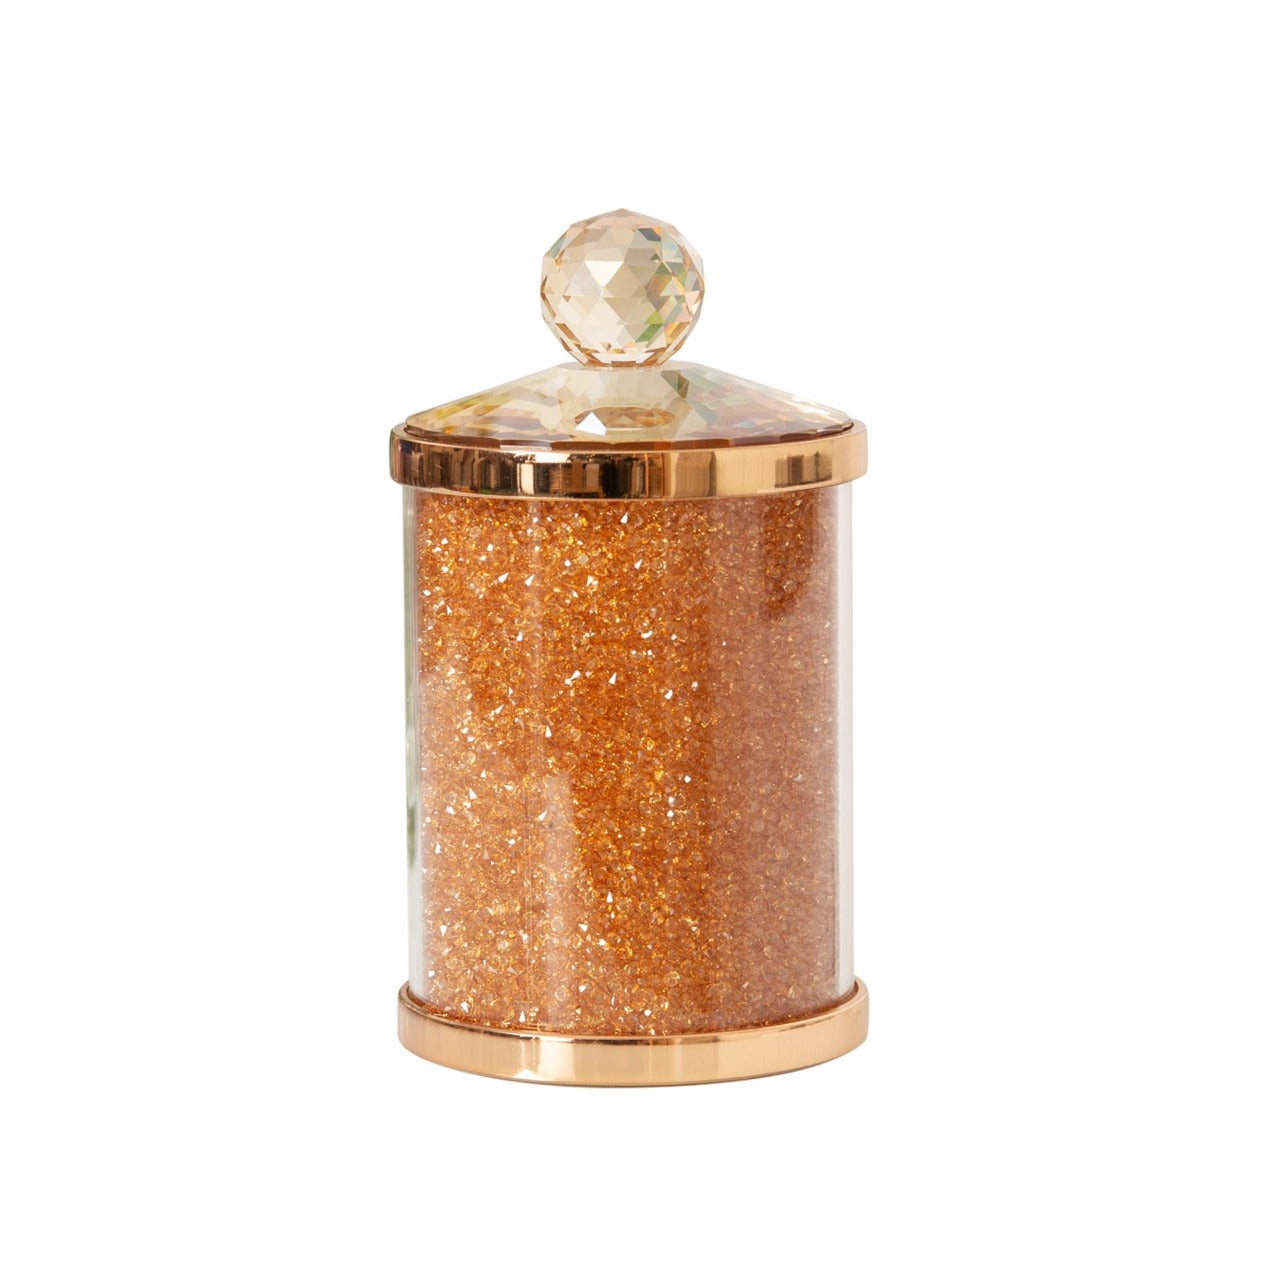 Estella Rose Gold Glass & Crystal Trinket Box  Store those bits and bobs, jewellery or keepsakes in style with this rose gold metal, champagne glass and amber crystal trinket box. From Estella by SOPHIA® - Champagne Chic women's home and gift evoking the luxurious spirit of the art deco era.